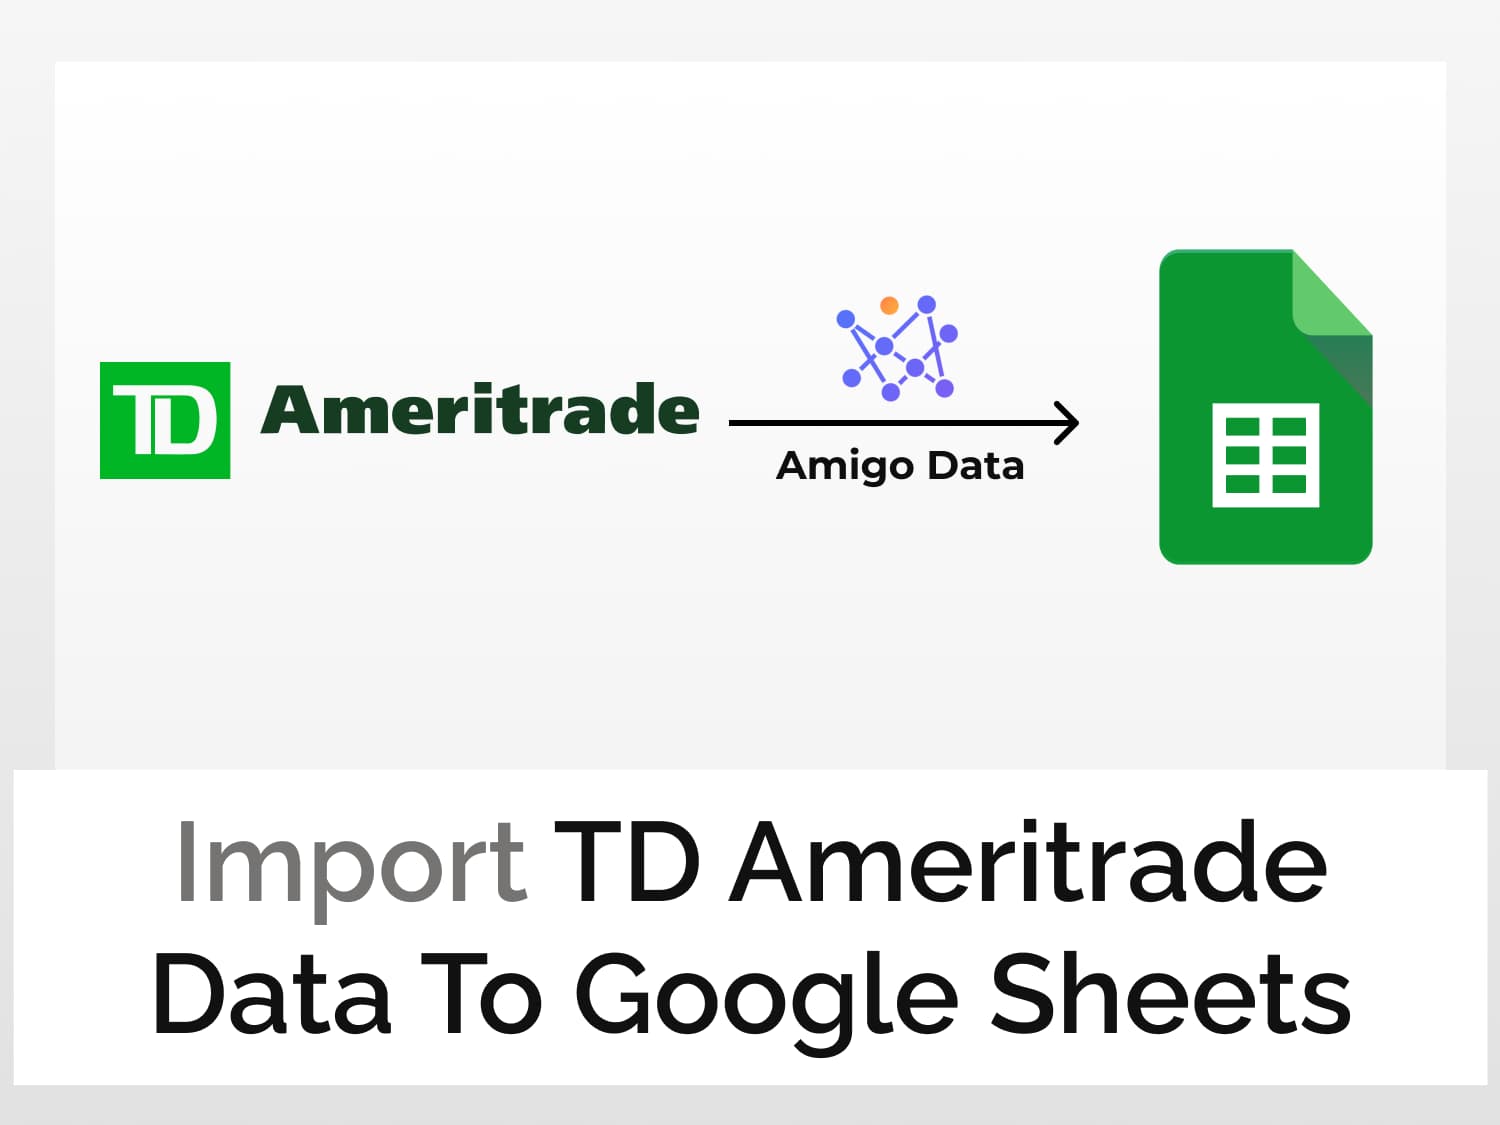 How to import TD Ameritrade data to Google Sheets